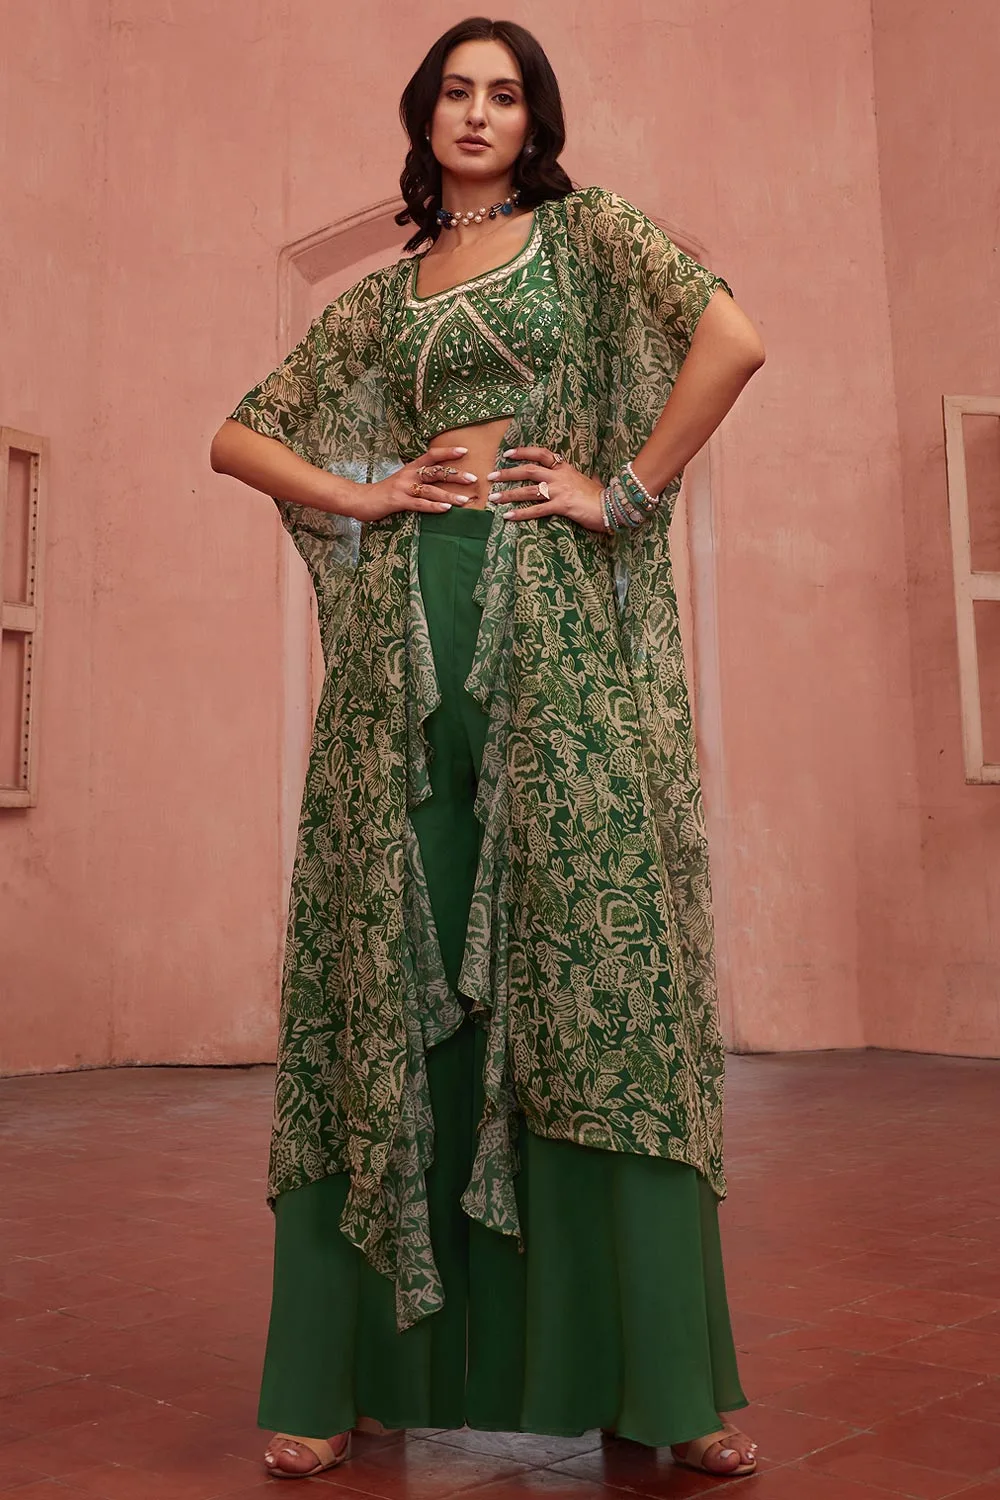 Green Dream – The Embroidered Georgette Indo-Western Lehenga with Jacket